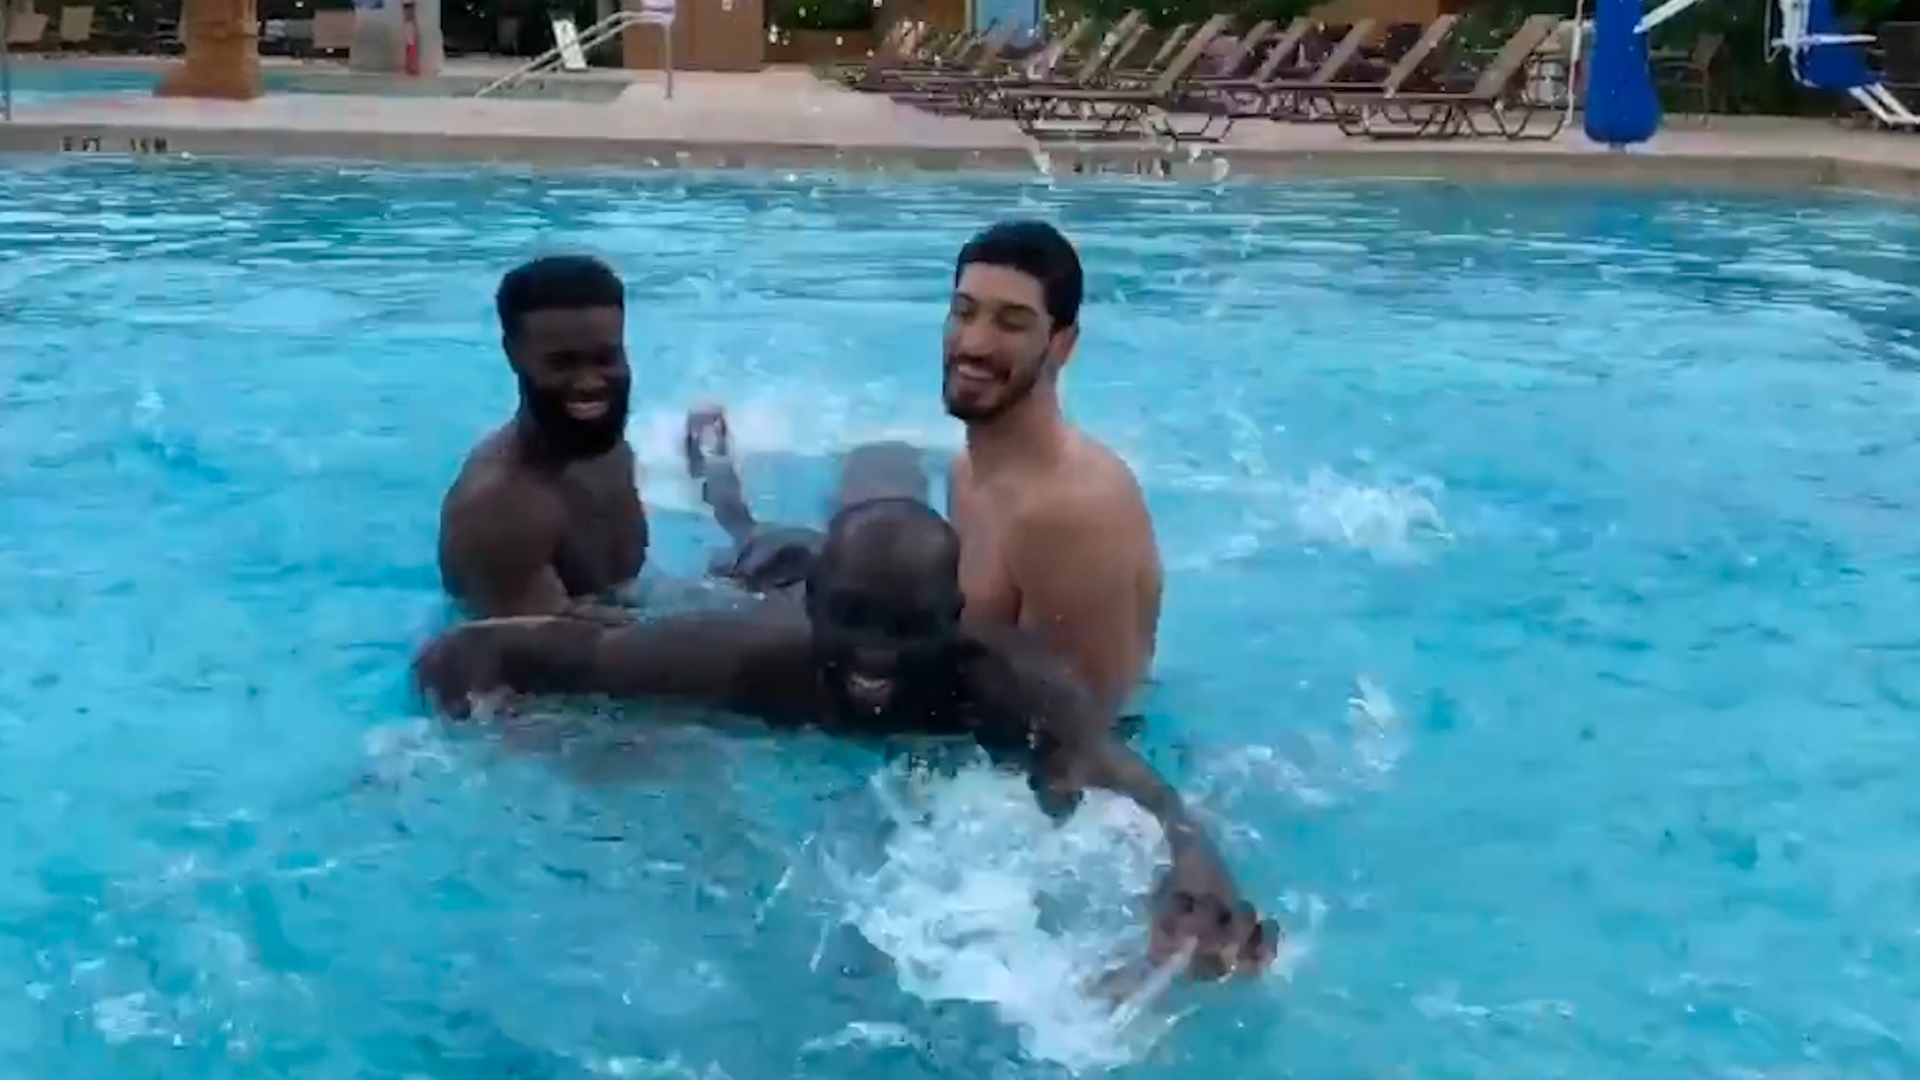 Tacko learns how to swim with help from his teammates - Stream the Video